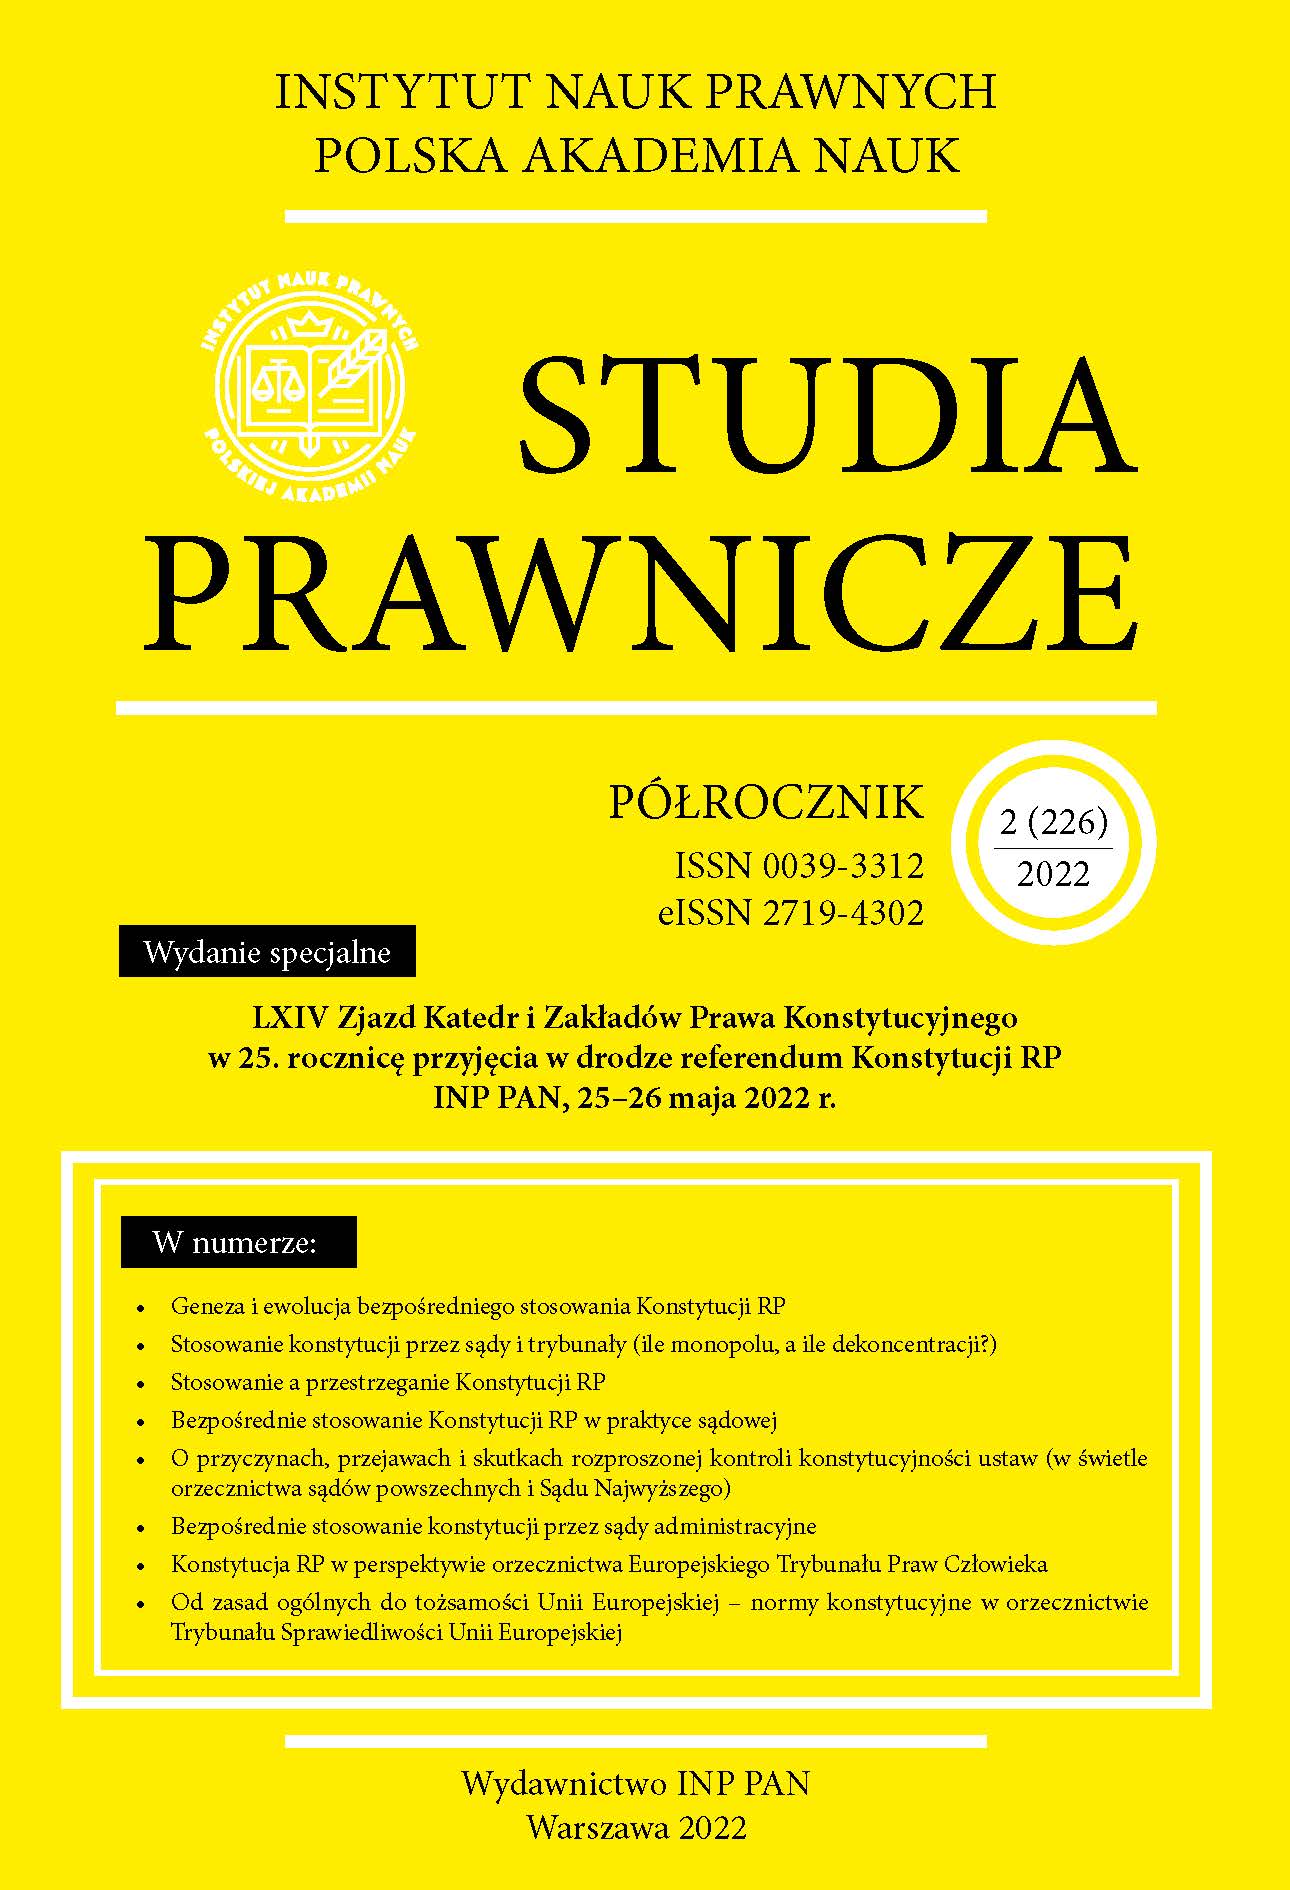 Application and observance of the Constitution of the Republic of Poland Cover Image